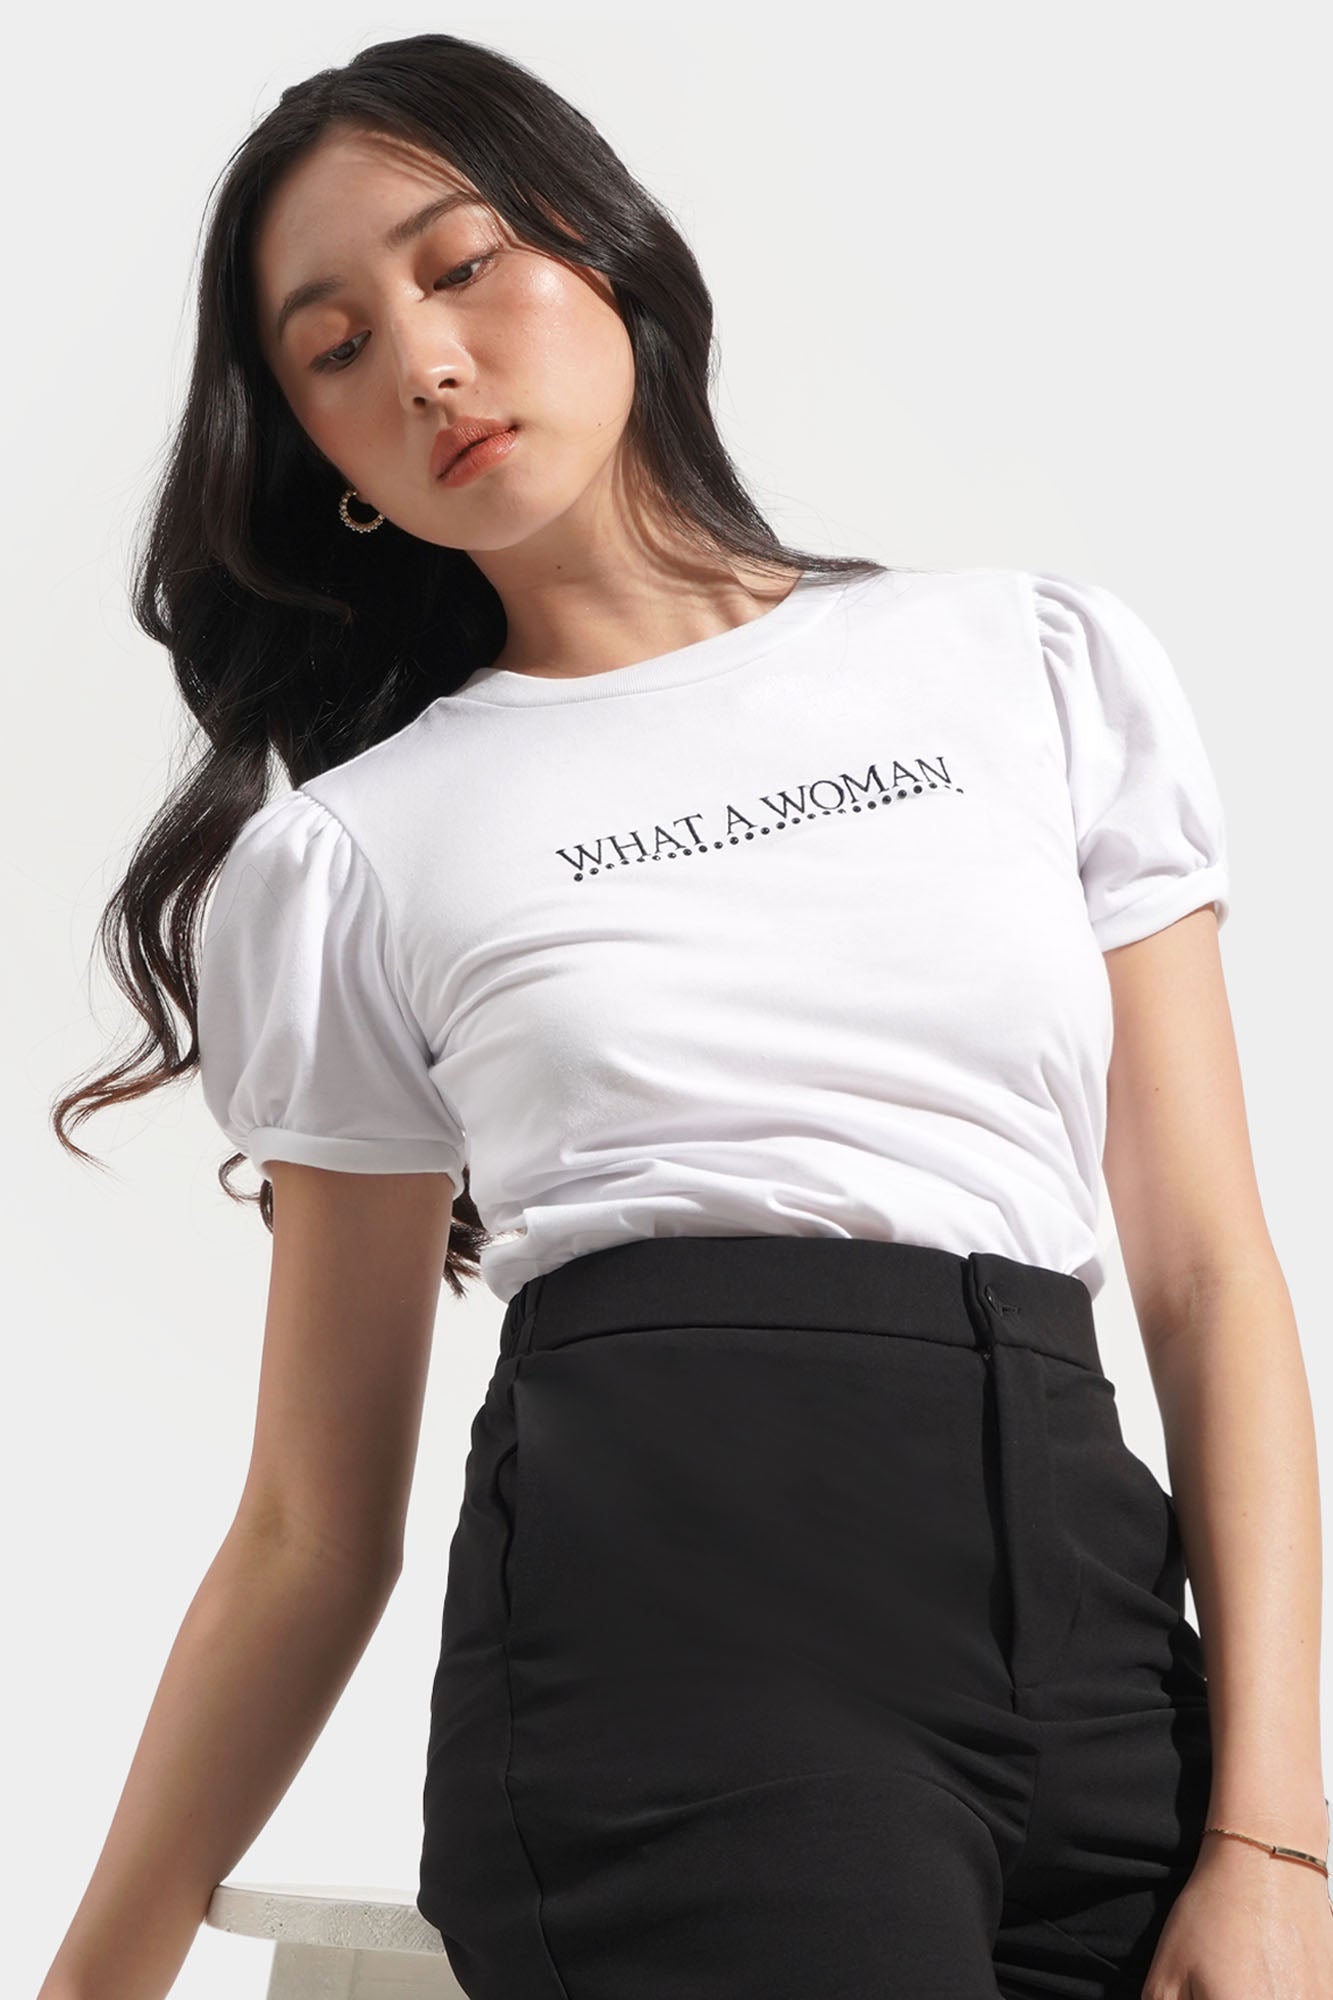 Made For Me: What A Woman Graphic Tee